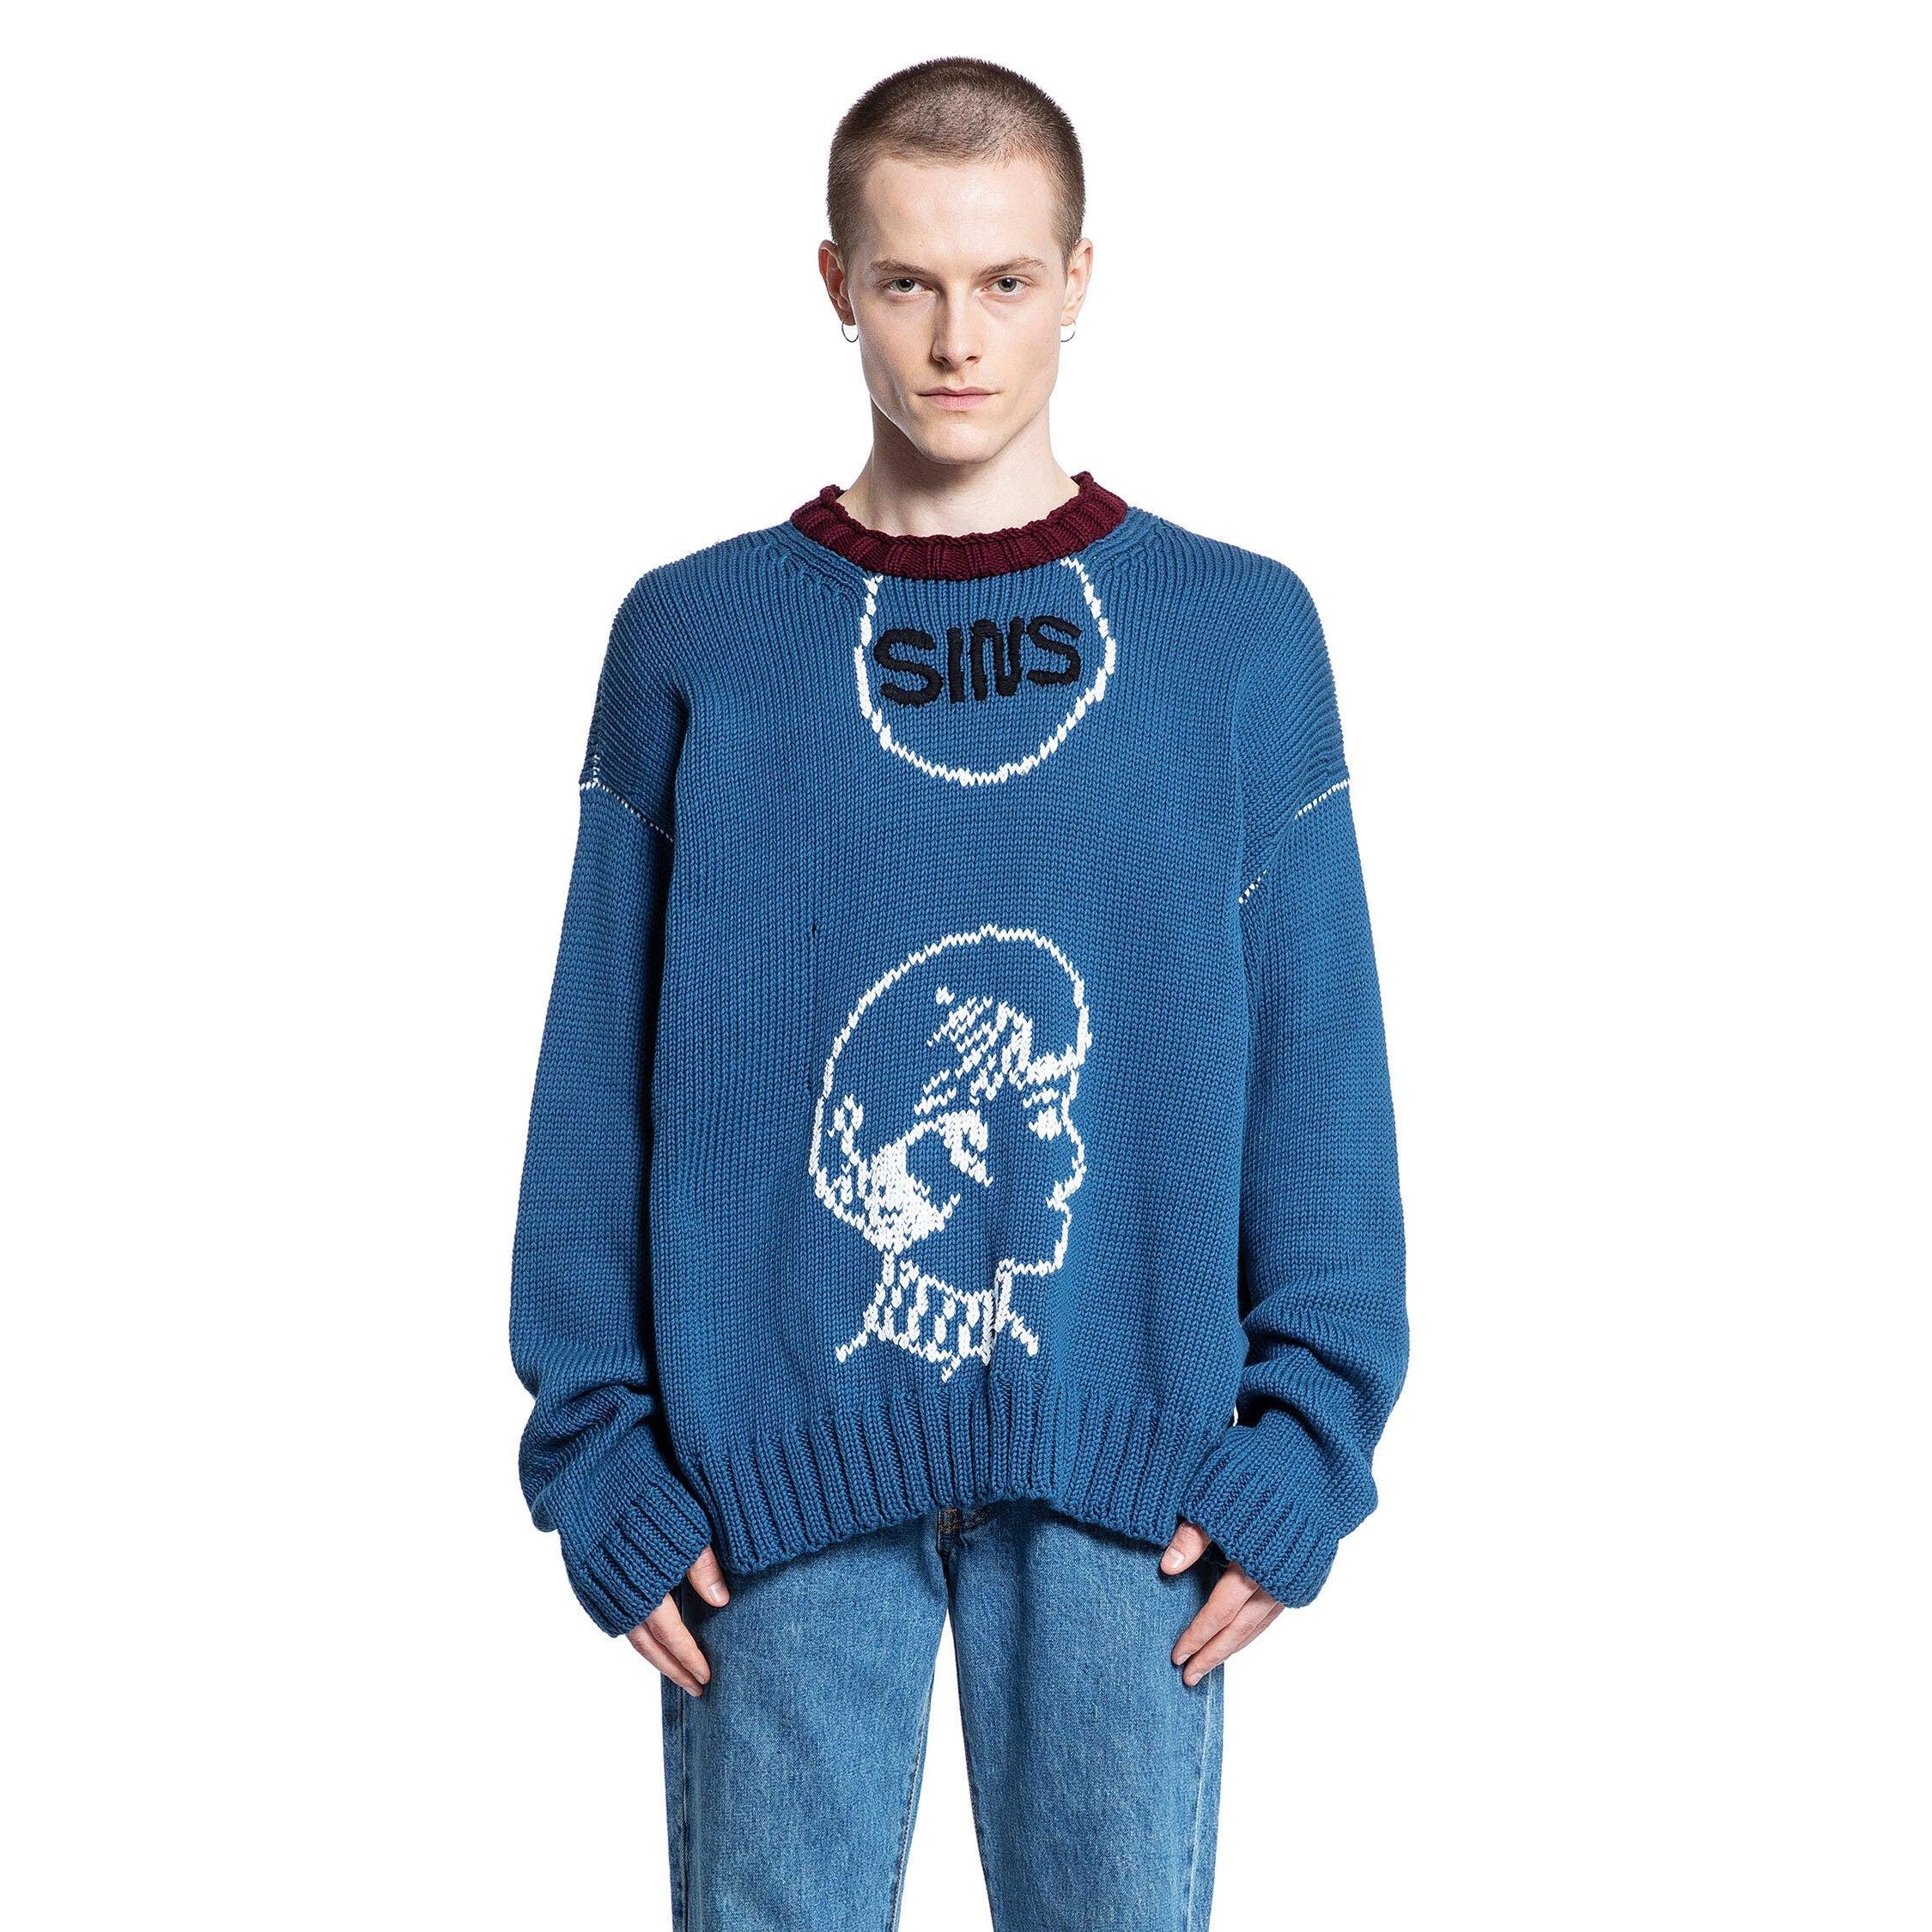 PALY HOLLYWOOD MAN BLUE KNITWEAR by PALY HOLLYWOOD